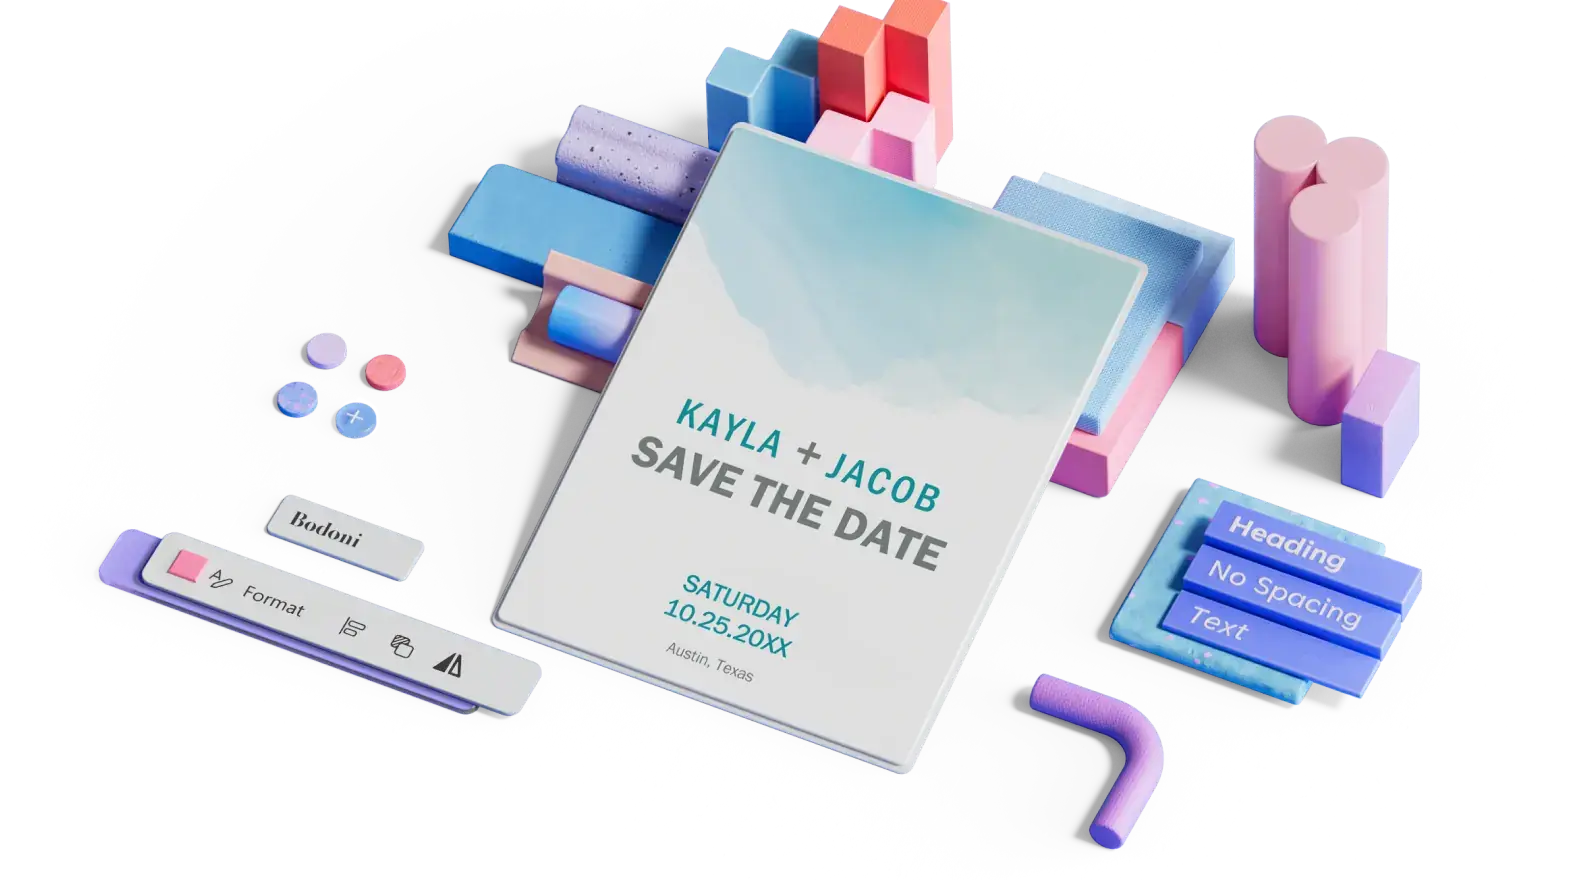 A stylized save the date card surrounded by decorative 3D elements